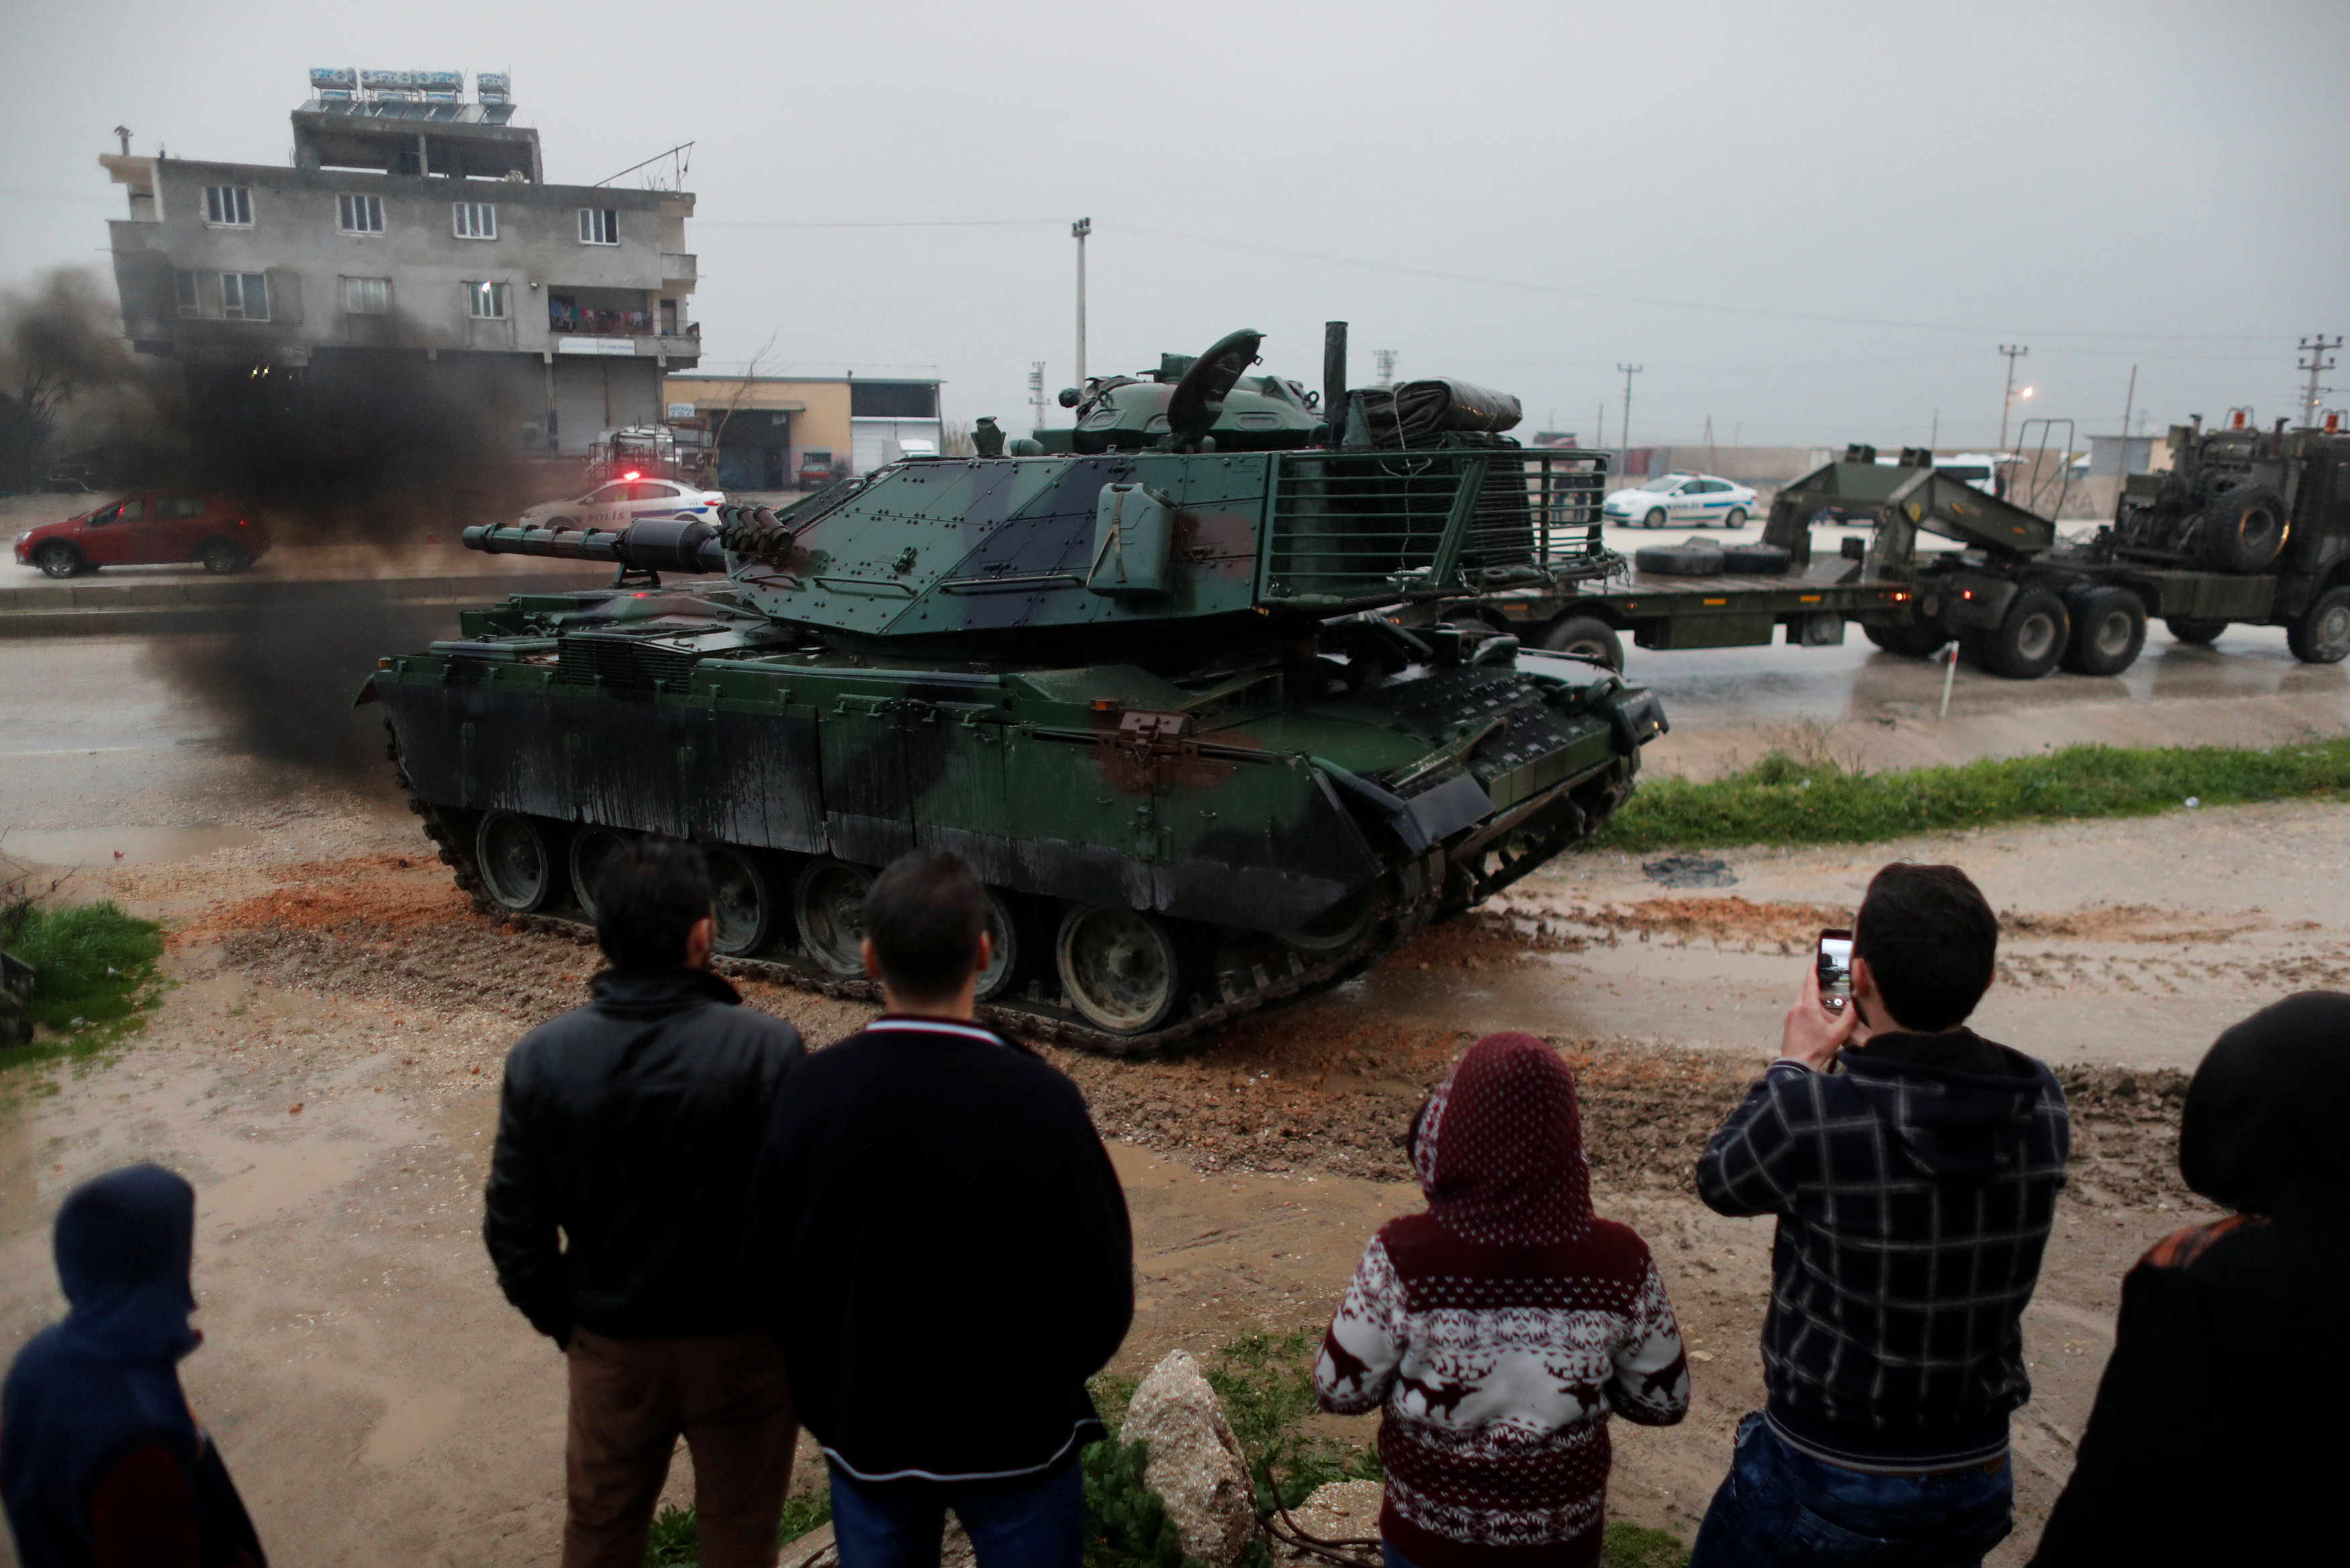 A Turkish military convoy arrives at an army base in the town of Reyhanlı, near the Turkish-Syrian border in Hatay province, Turkey, January 17.